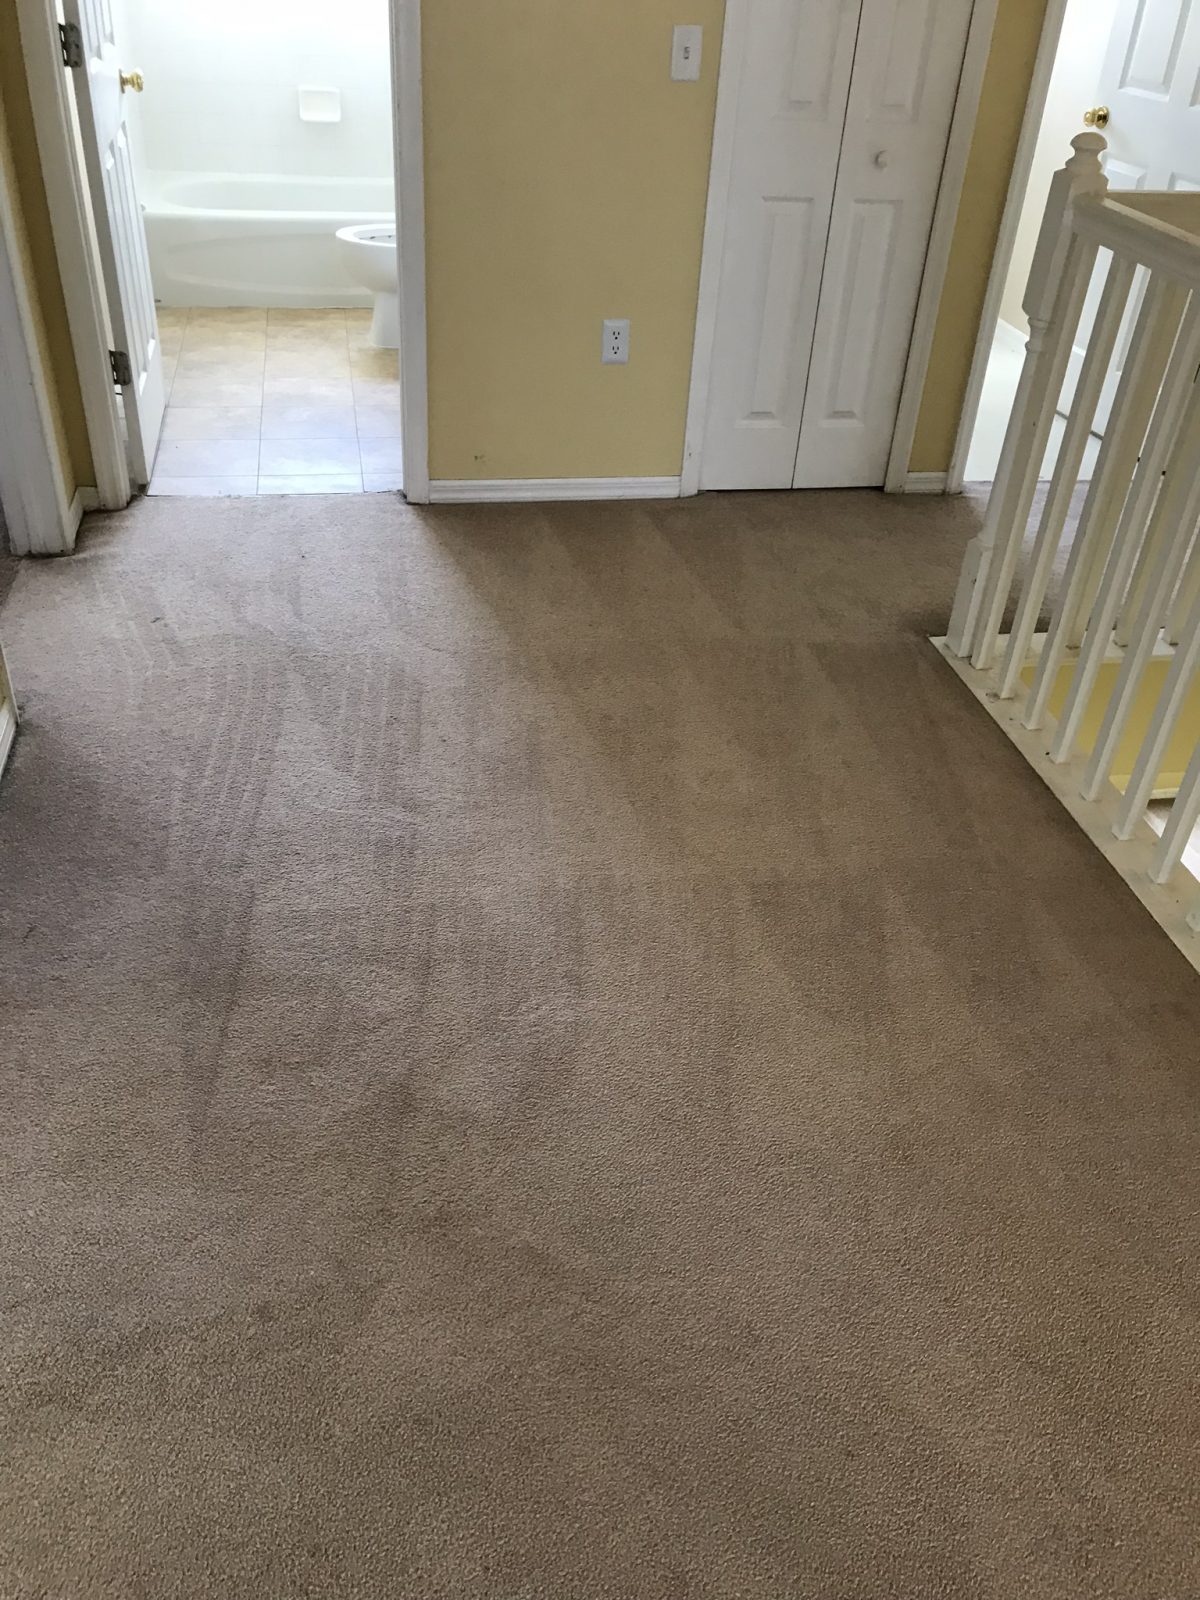 Professional Carpet Cleaning Palm Harbor Florida by Howards Cleaning Service